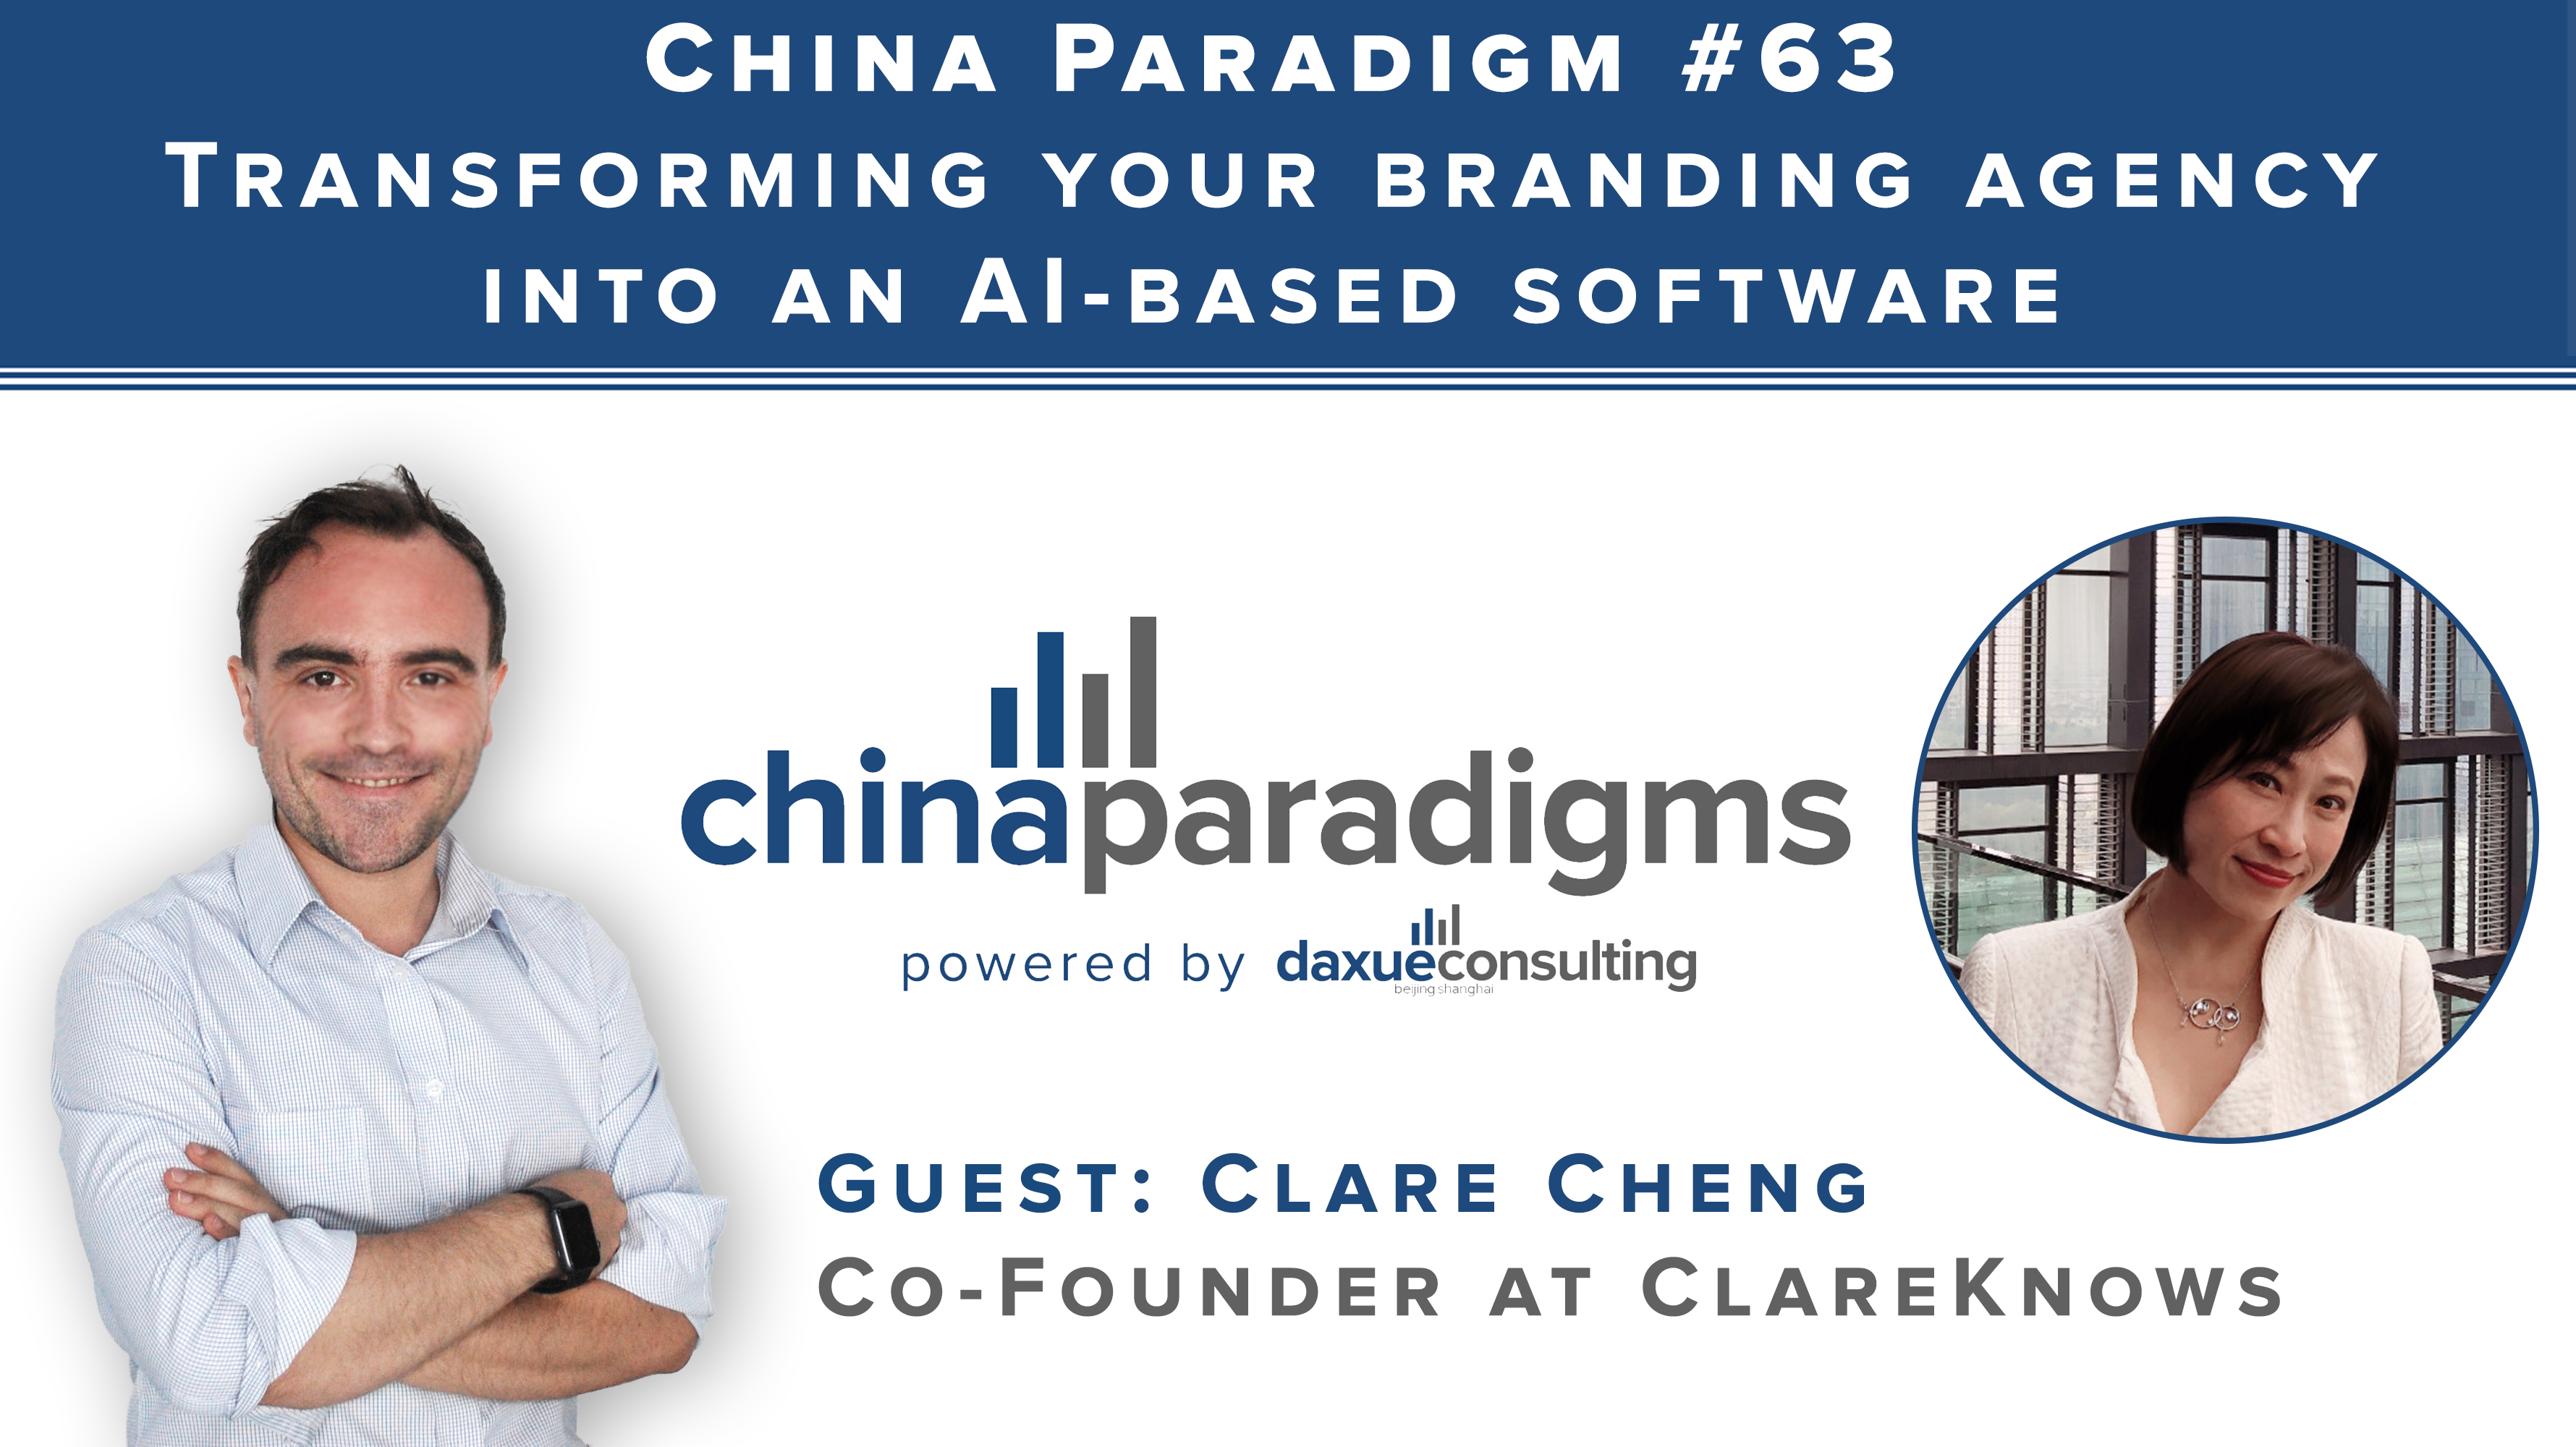 China Paradigm 63: Transforming your branding agency into an AI-based software